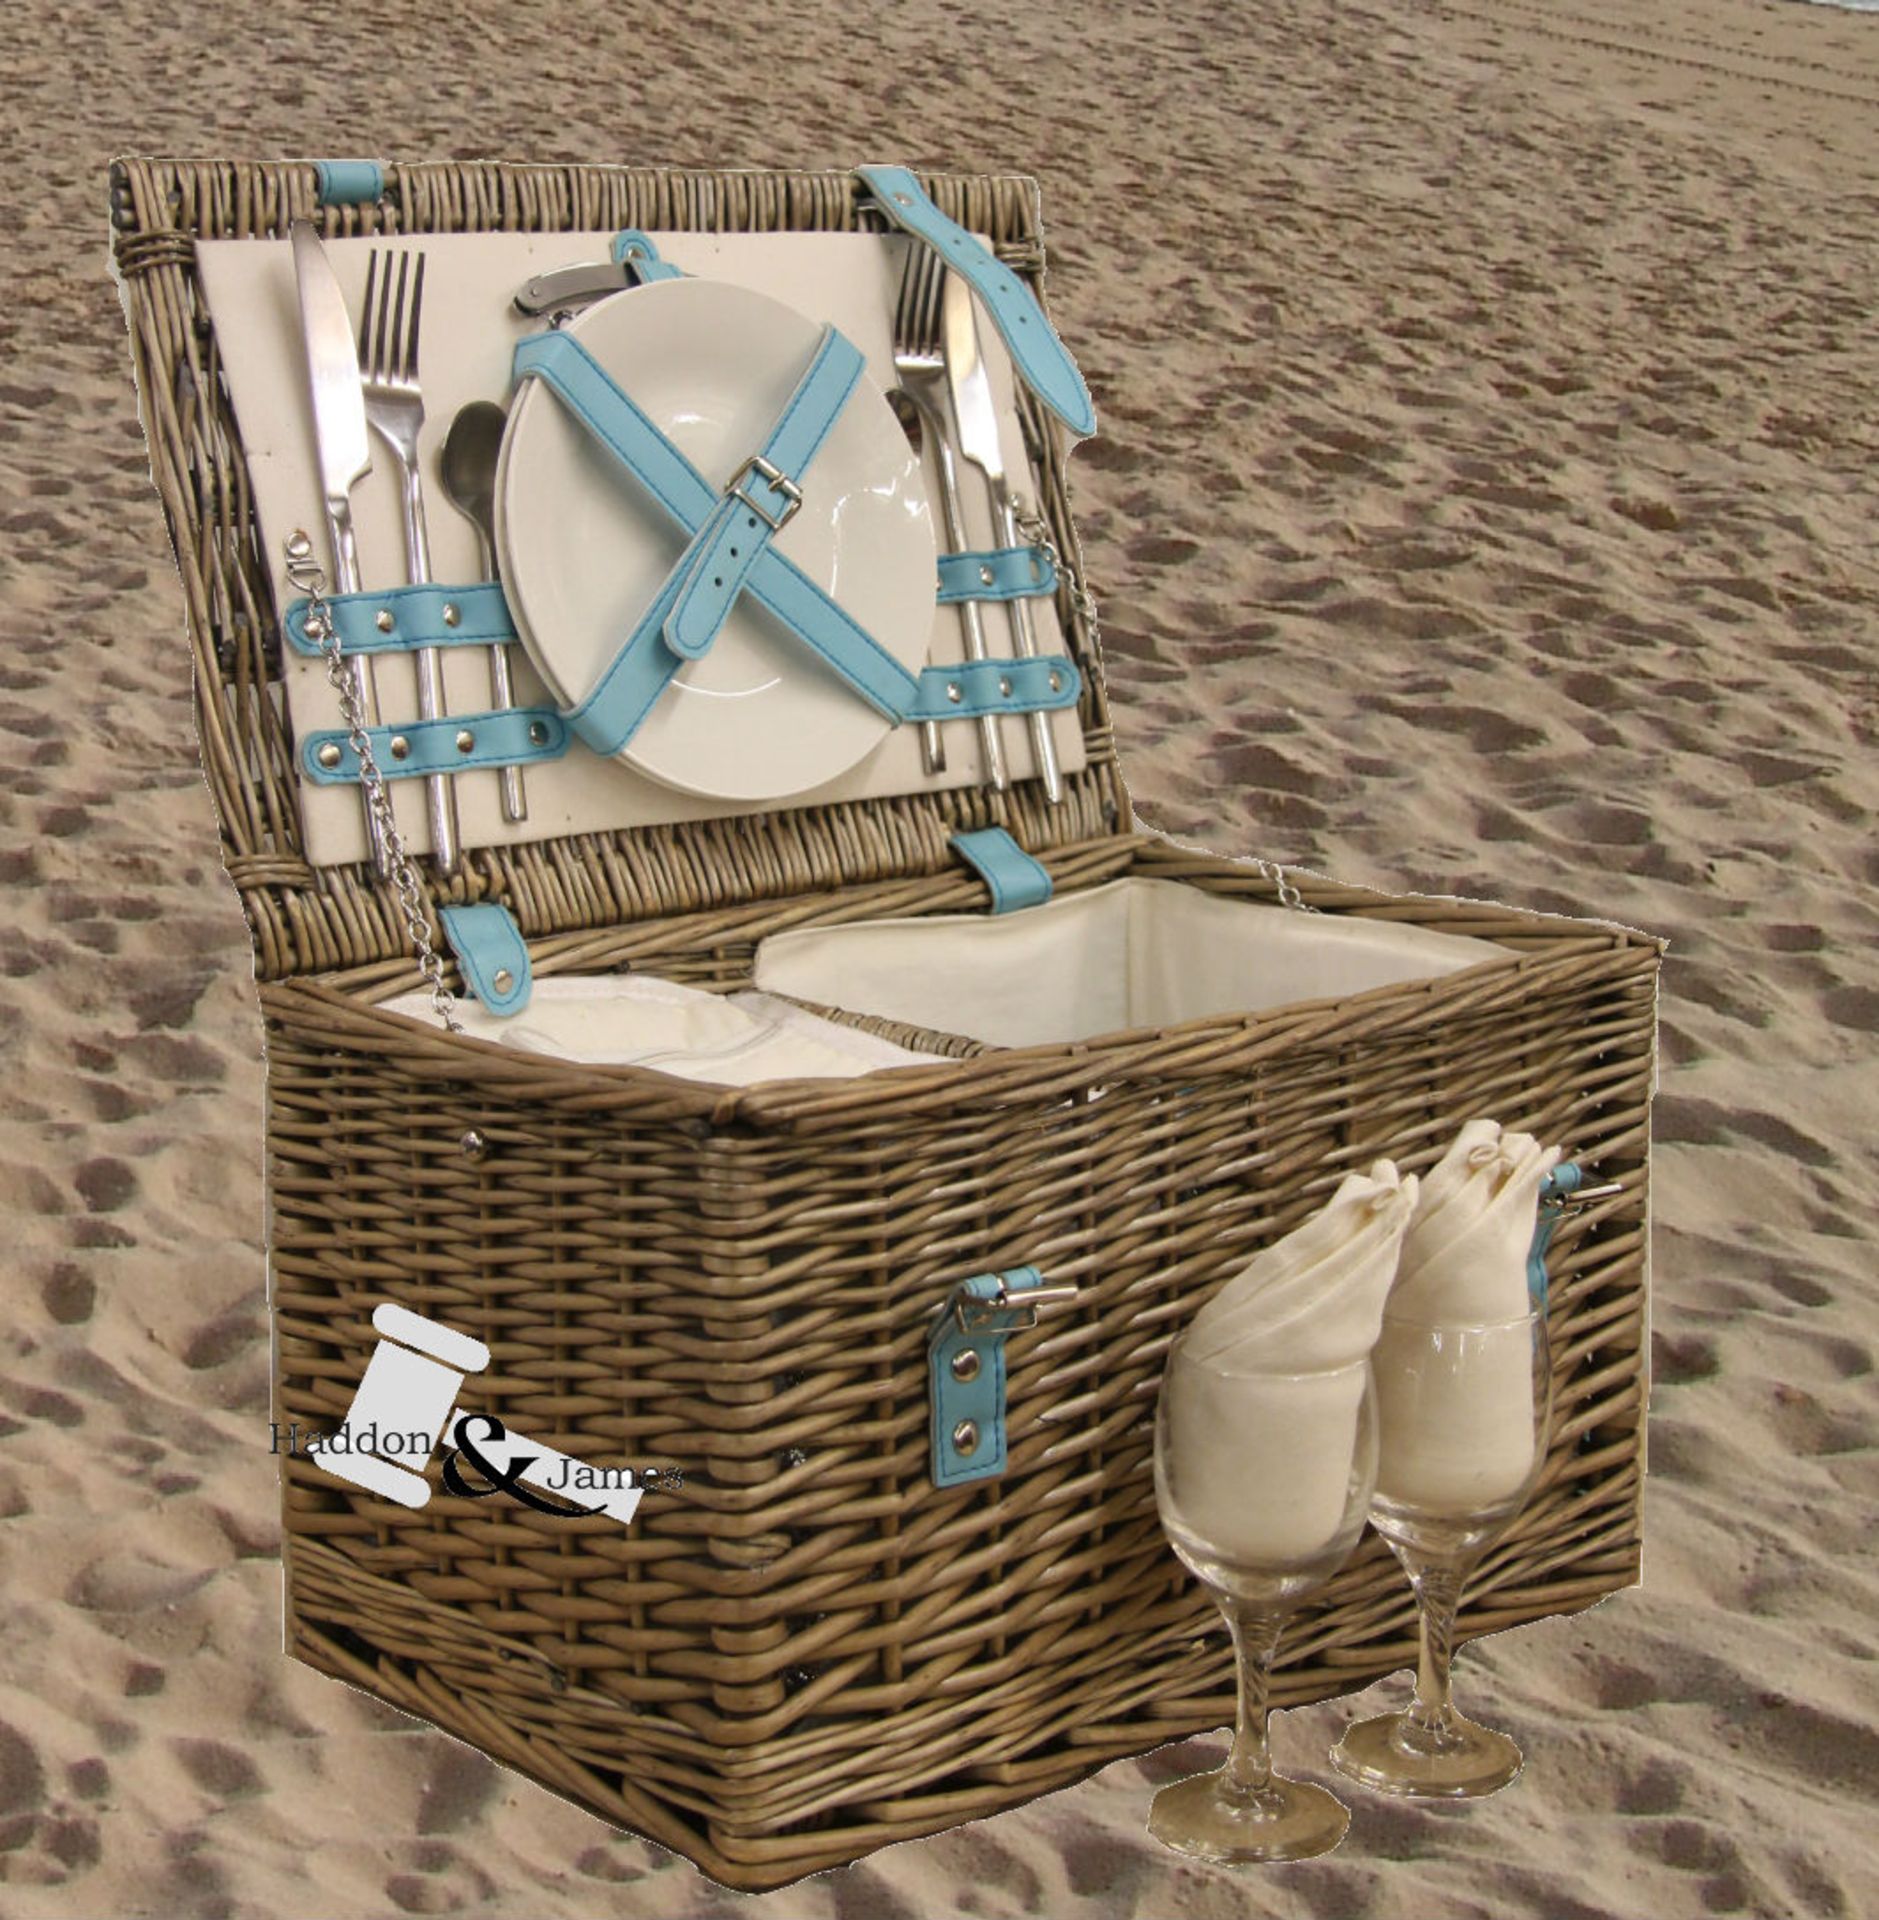 V Brand New 2 Person Willow Hamper Basket with Cooler Section - Two China Plates - A Set of Two